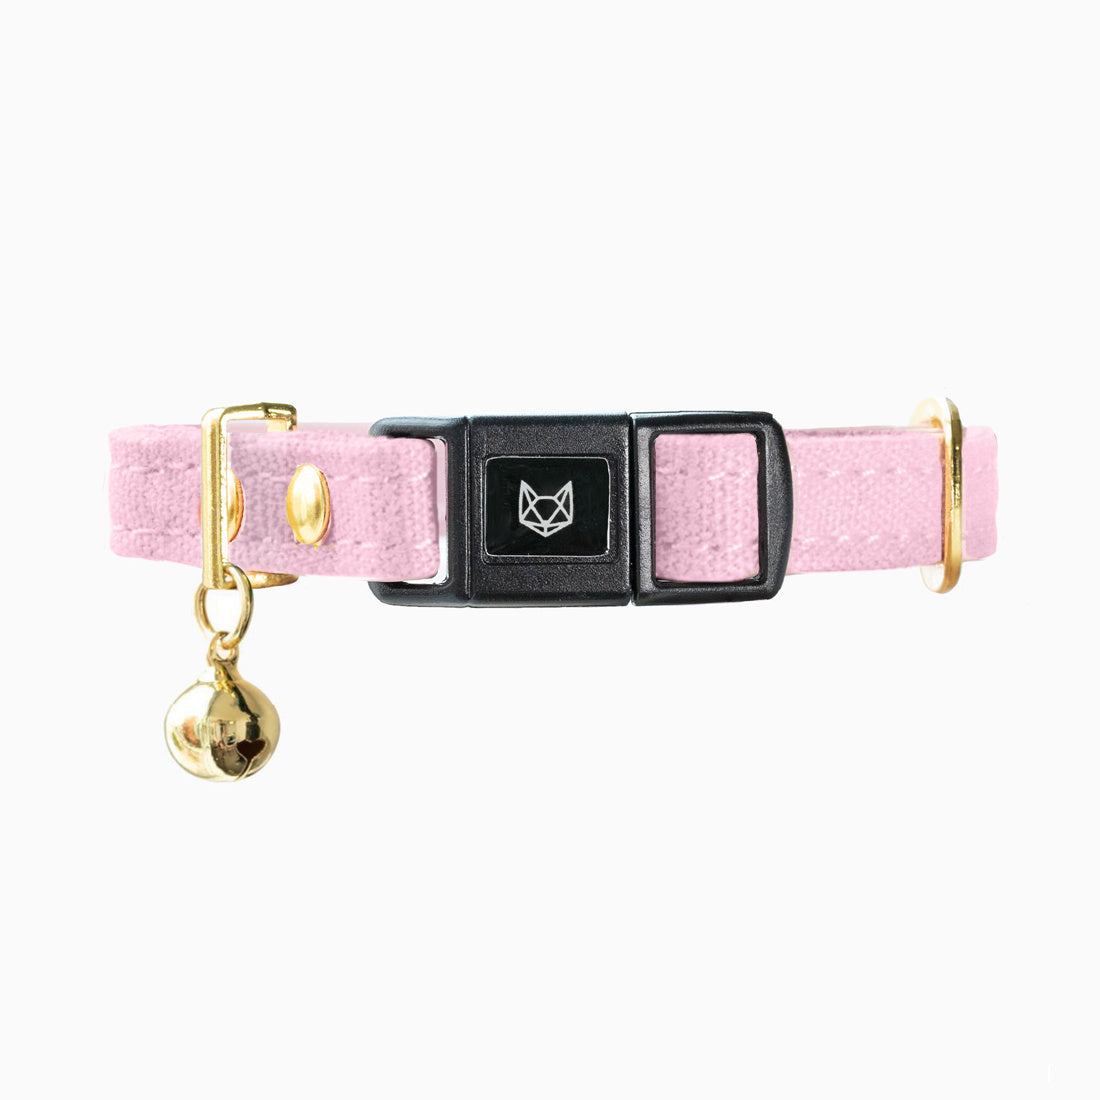 Primrose Pink Cotton Kitten Collars by Pawsome Couture Thumbnail